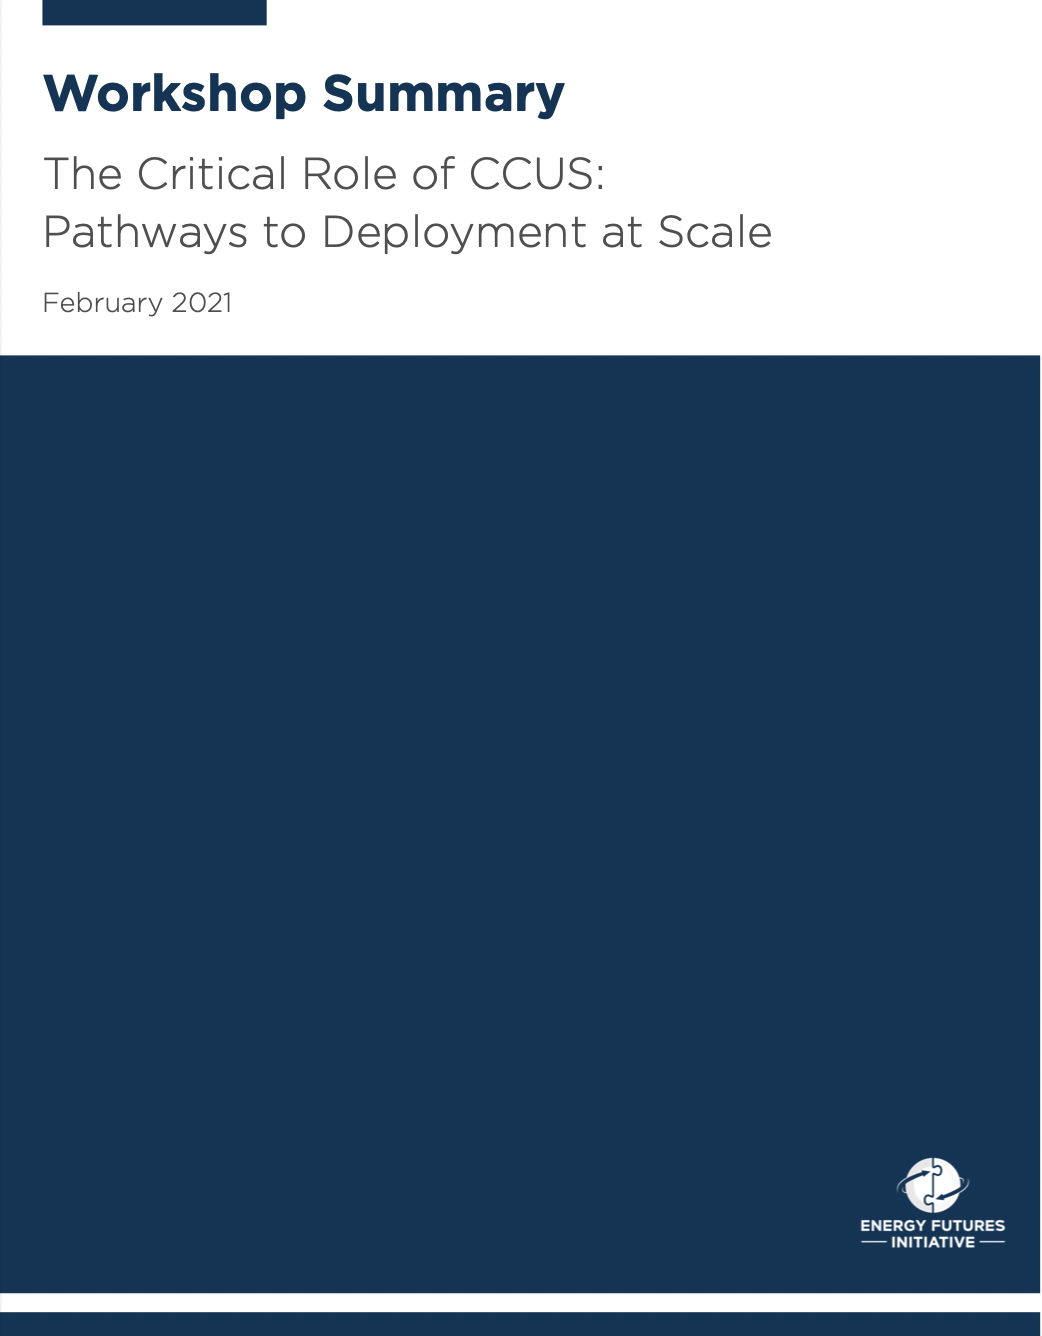 Cover of The Critical Role of CCUS Workshop Summary report